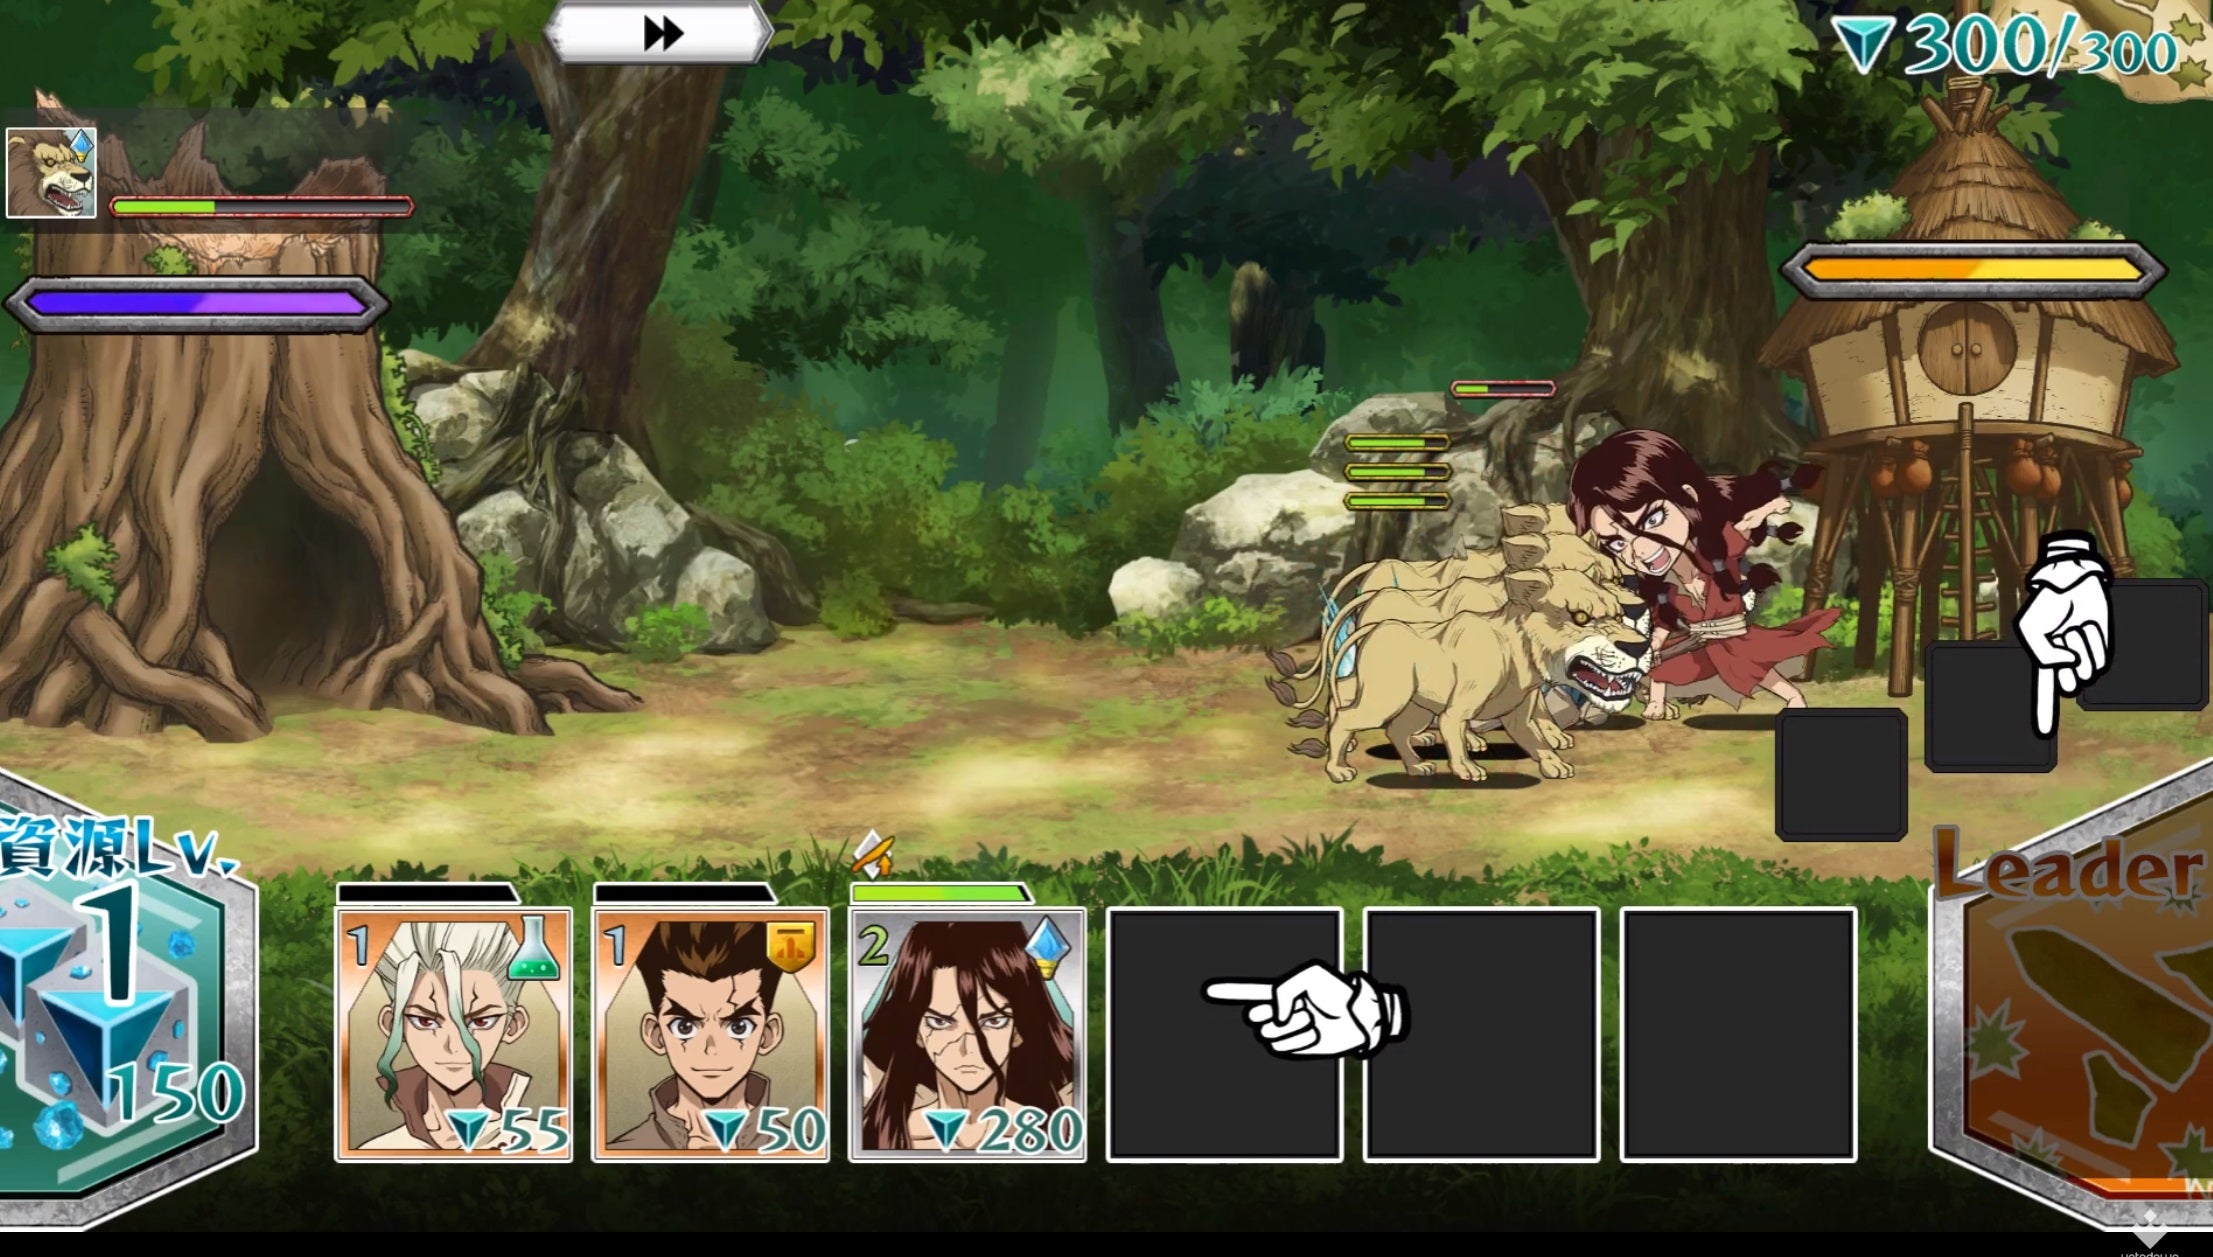 Dr. Stone mobile gameplay